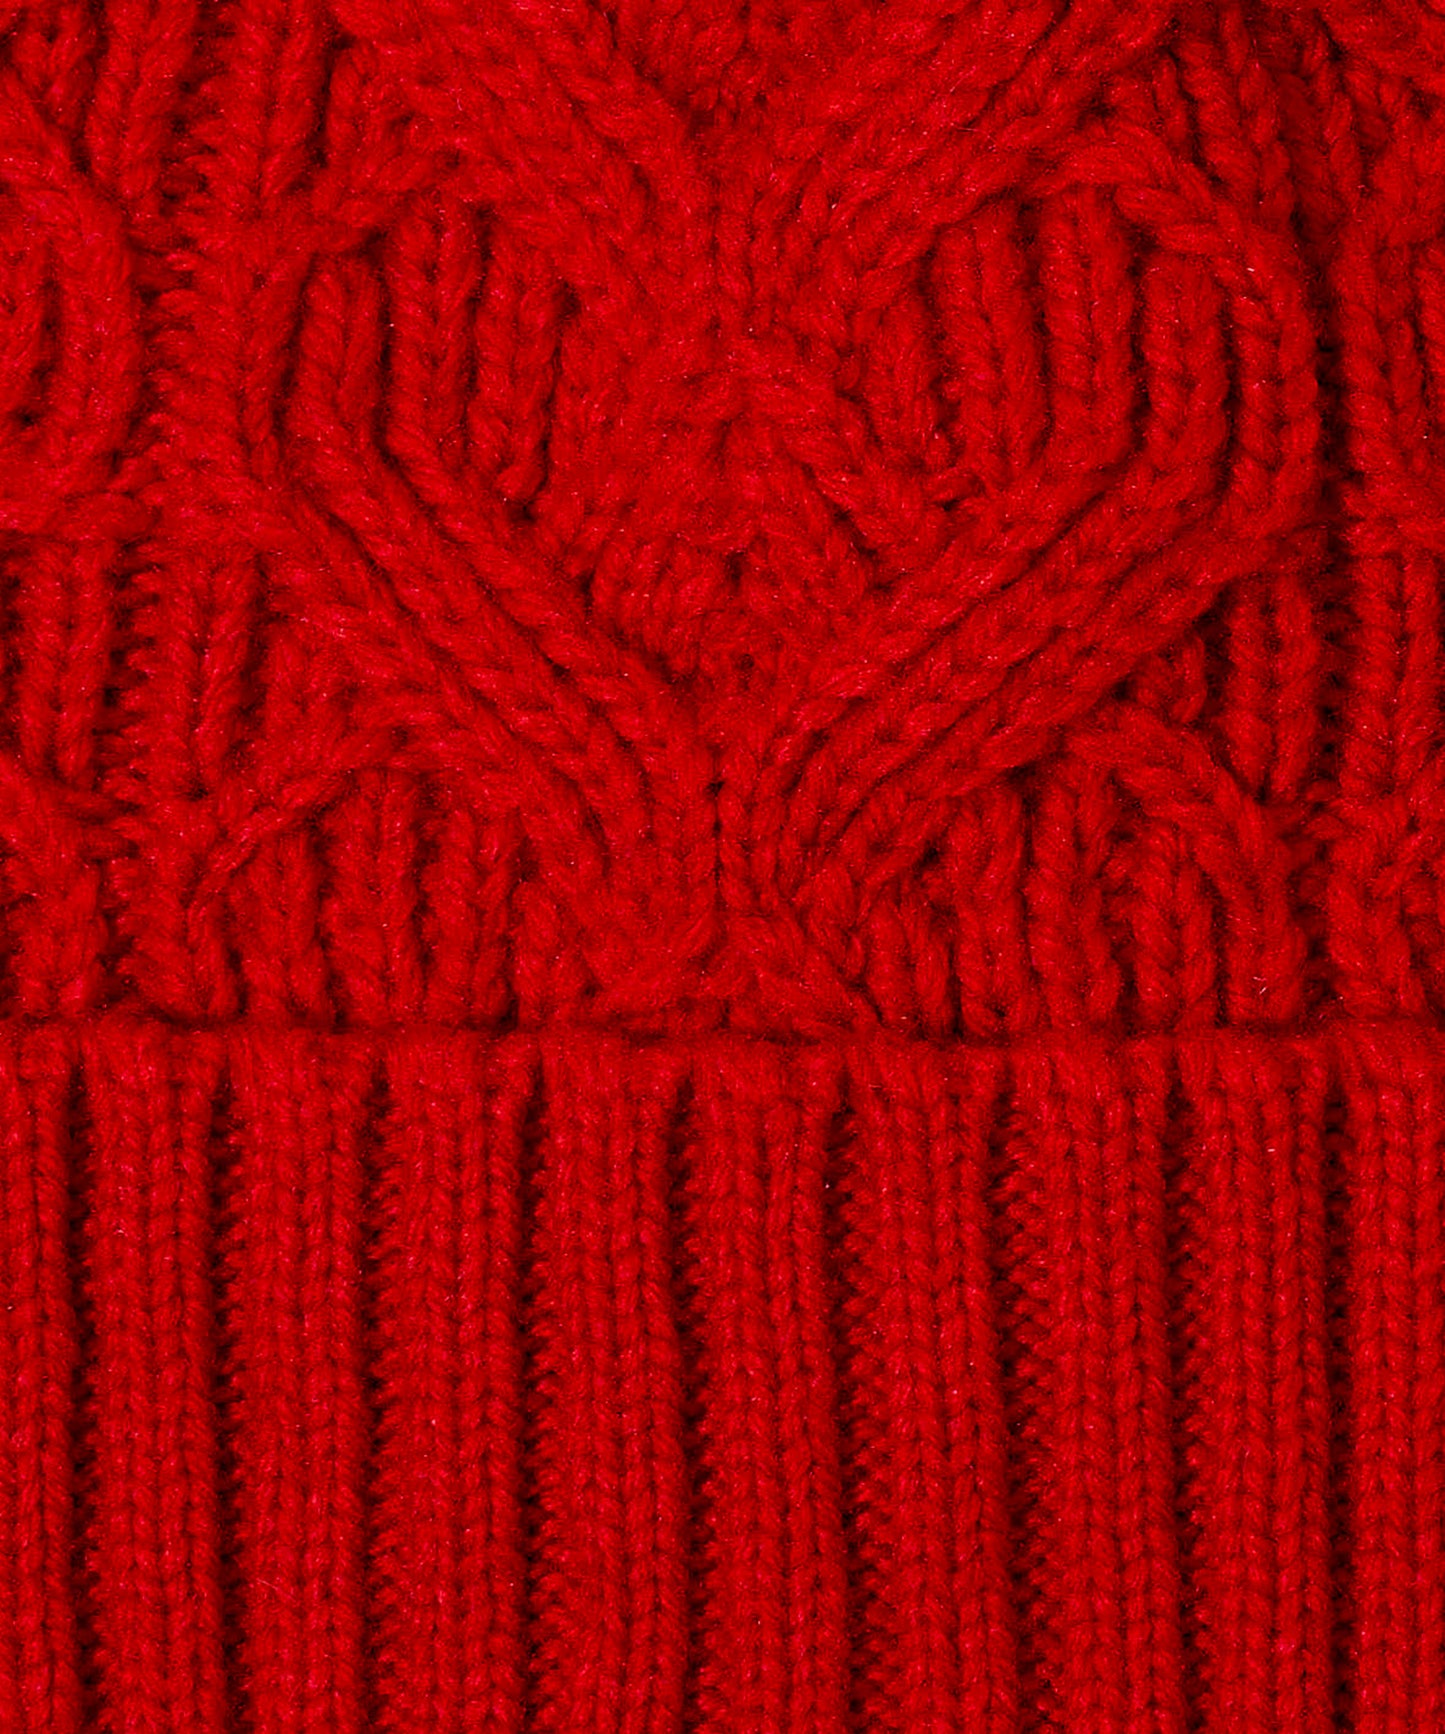 Loopy Cable Pom Hat in color Ruby Red